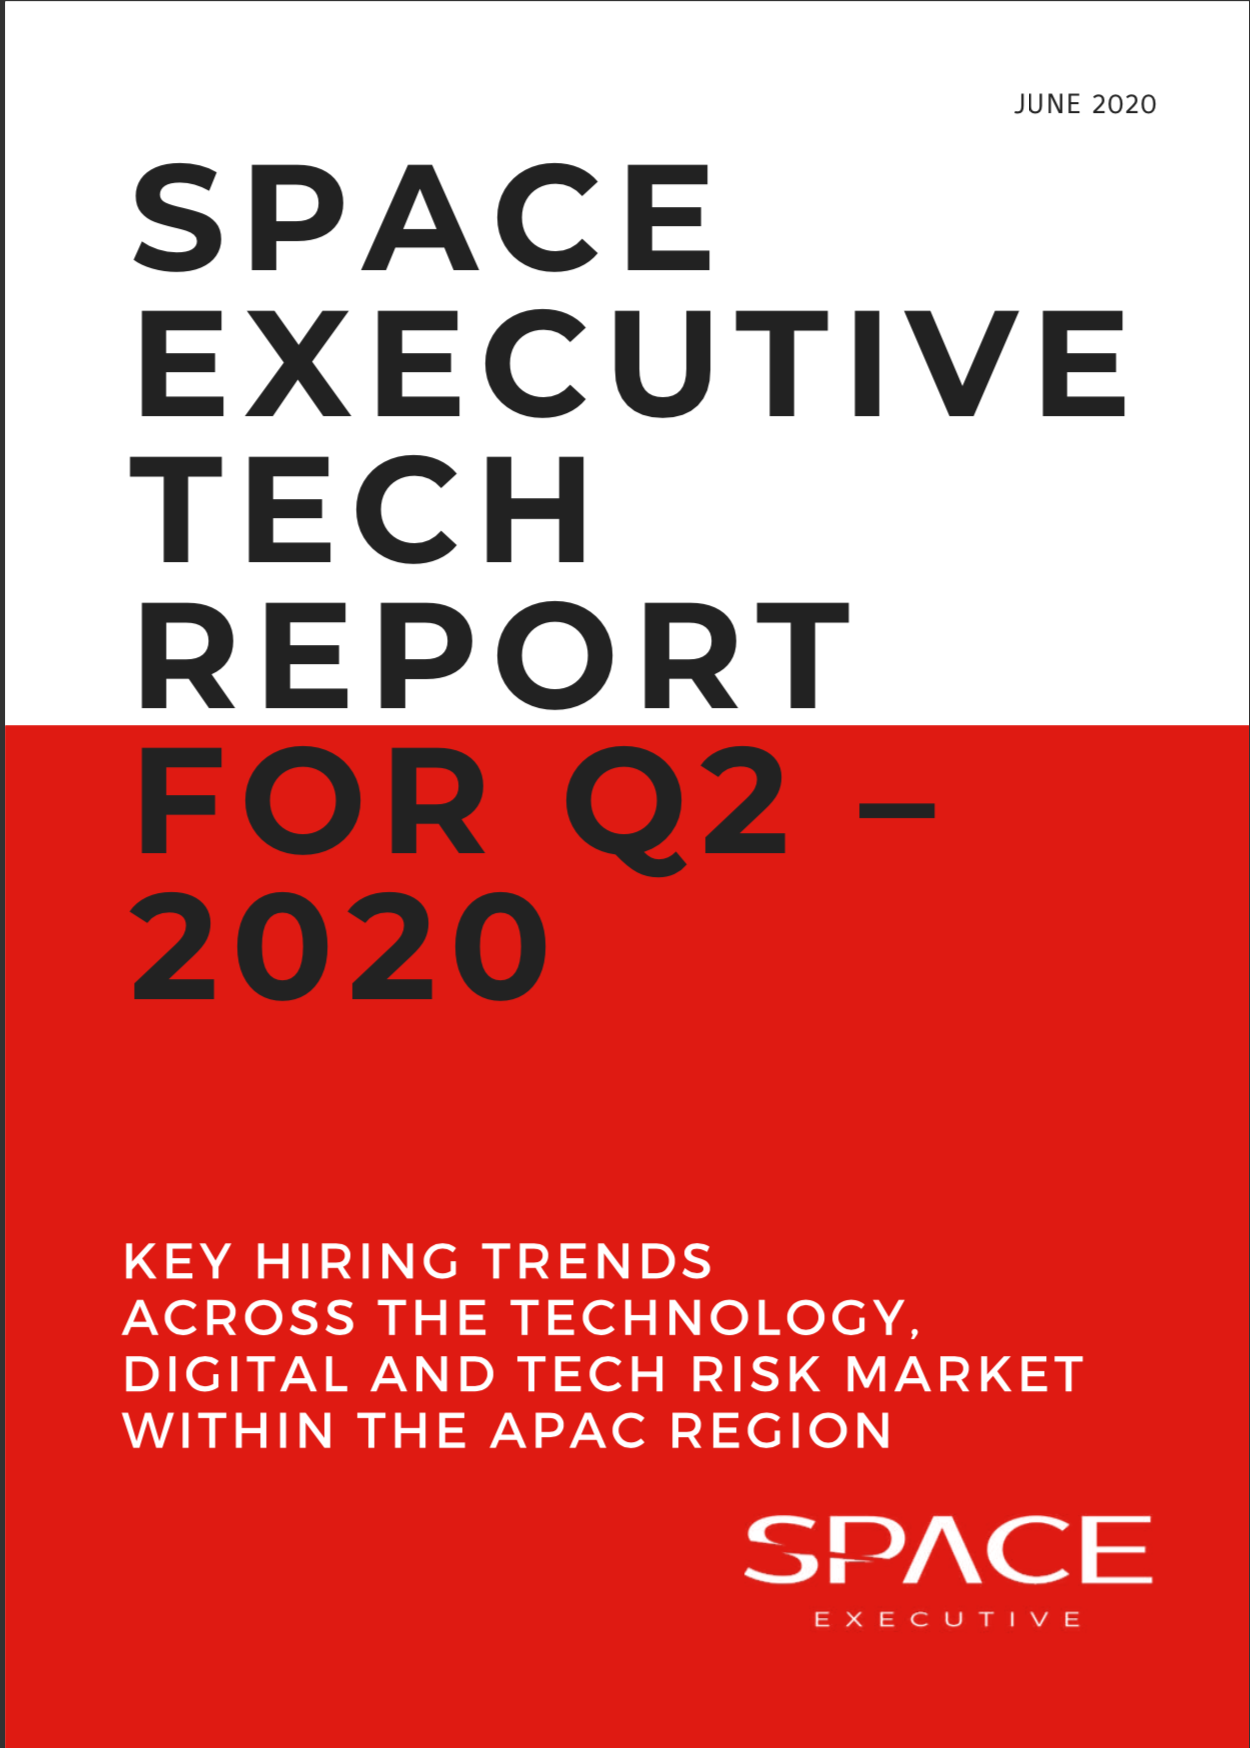 Key Hiring Trends Across the Technology, Digital and Tech Risk Market Within the APAC Region